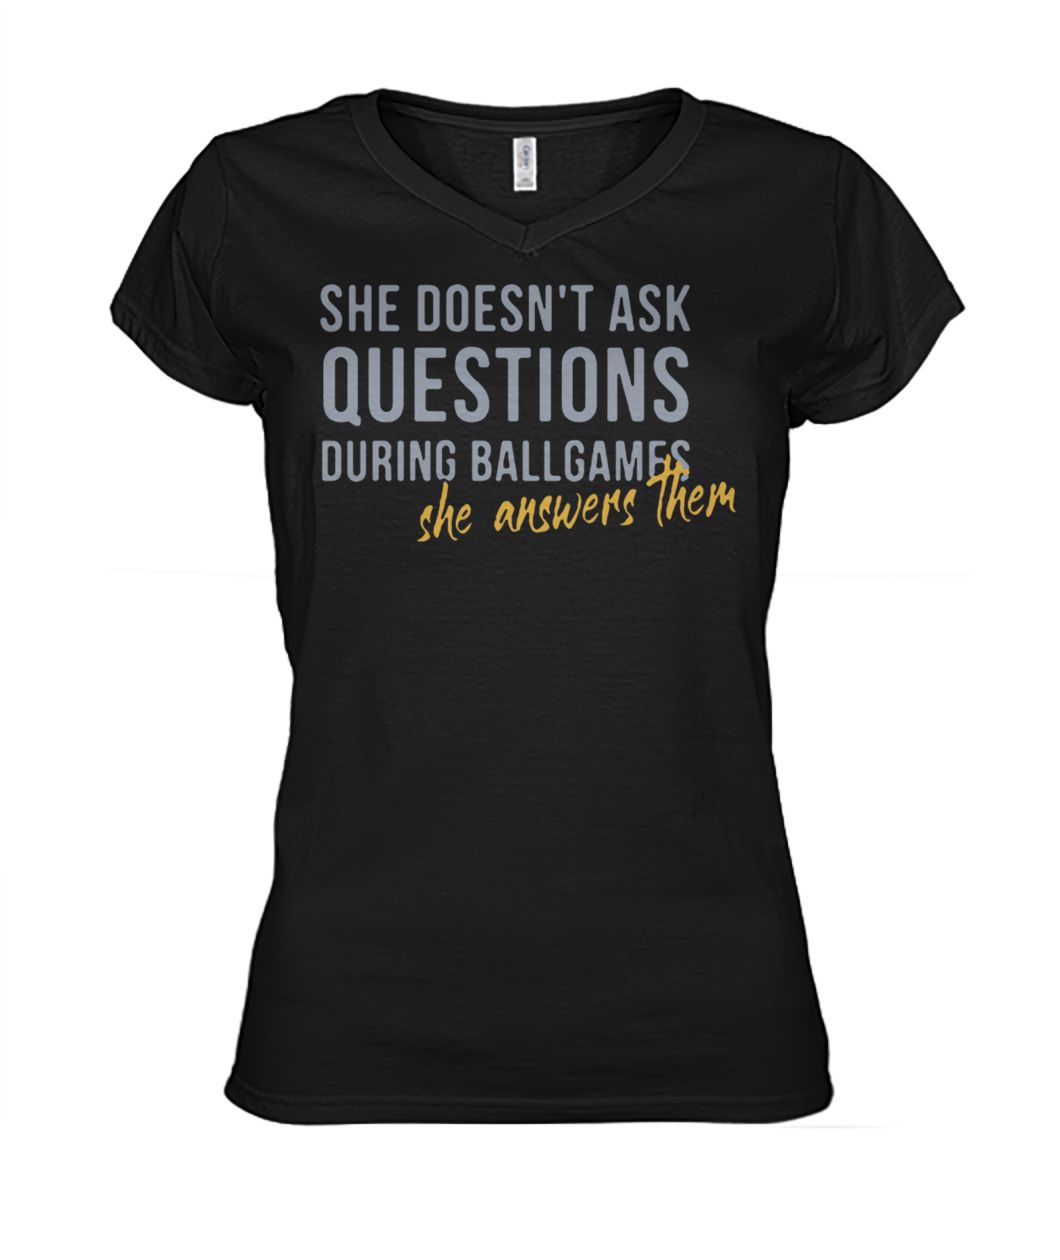 She doesn't ask questions during ballgames she answers them women's v-neck